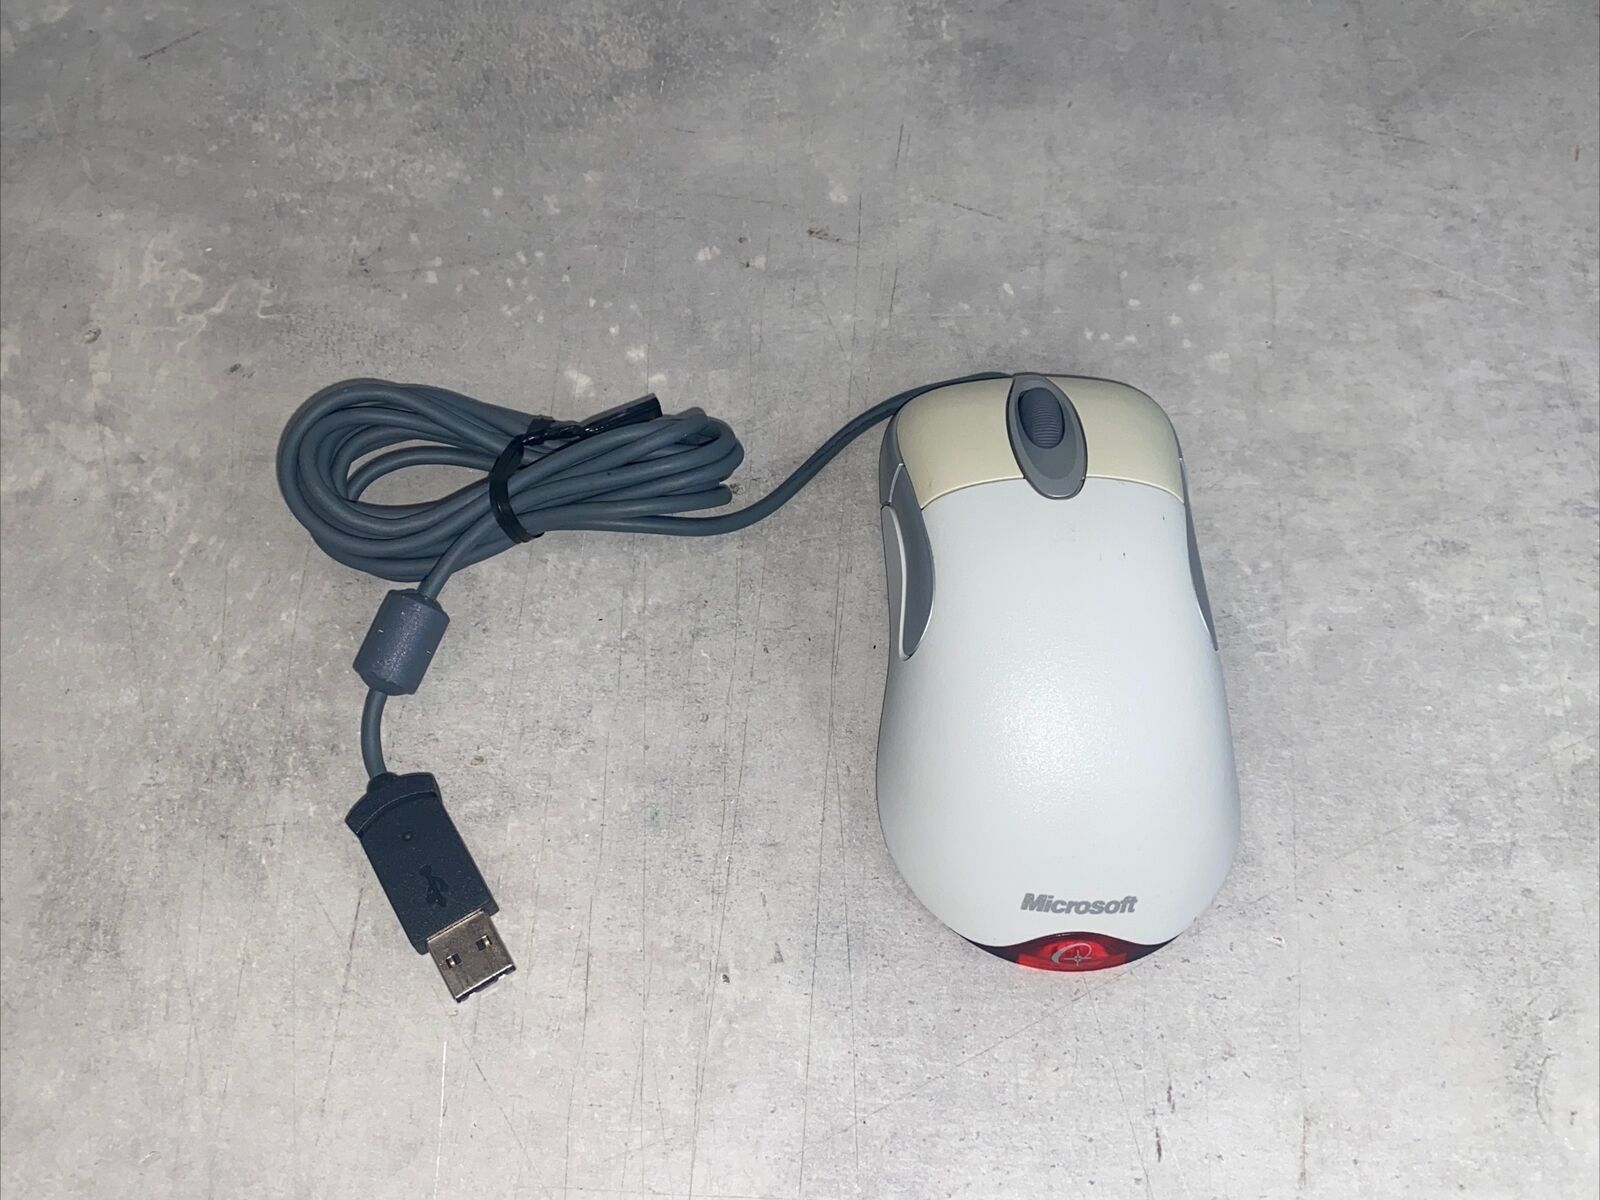 Microsoft IntelliMouse Optical USB and PS/2 Compatible Mice - White